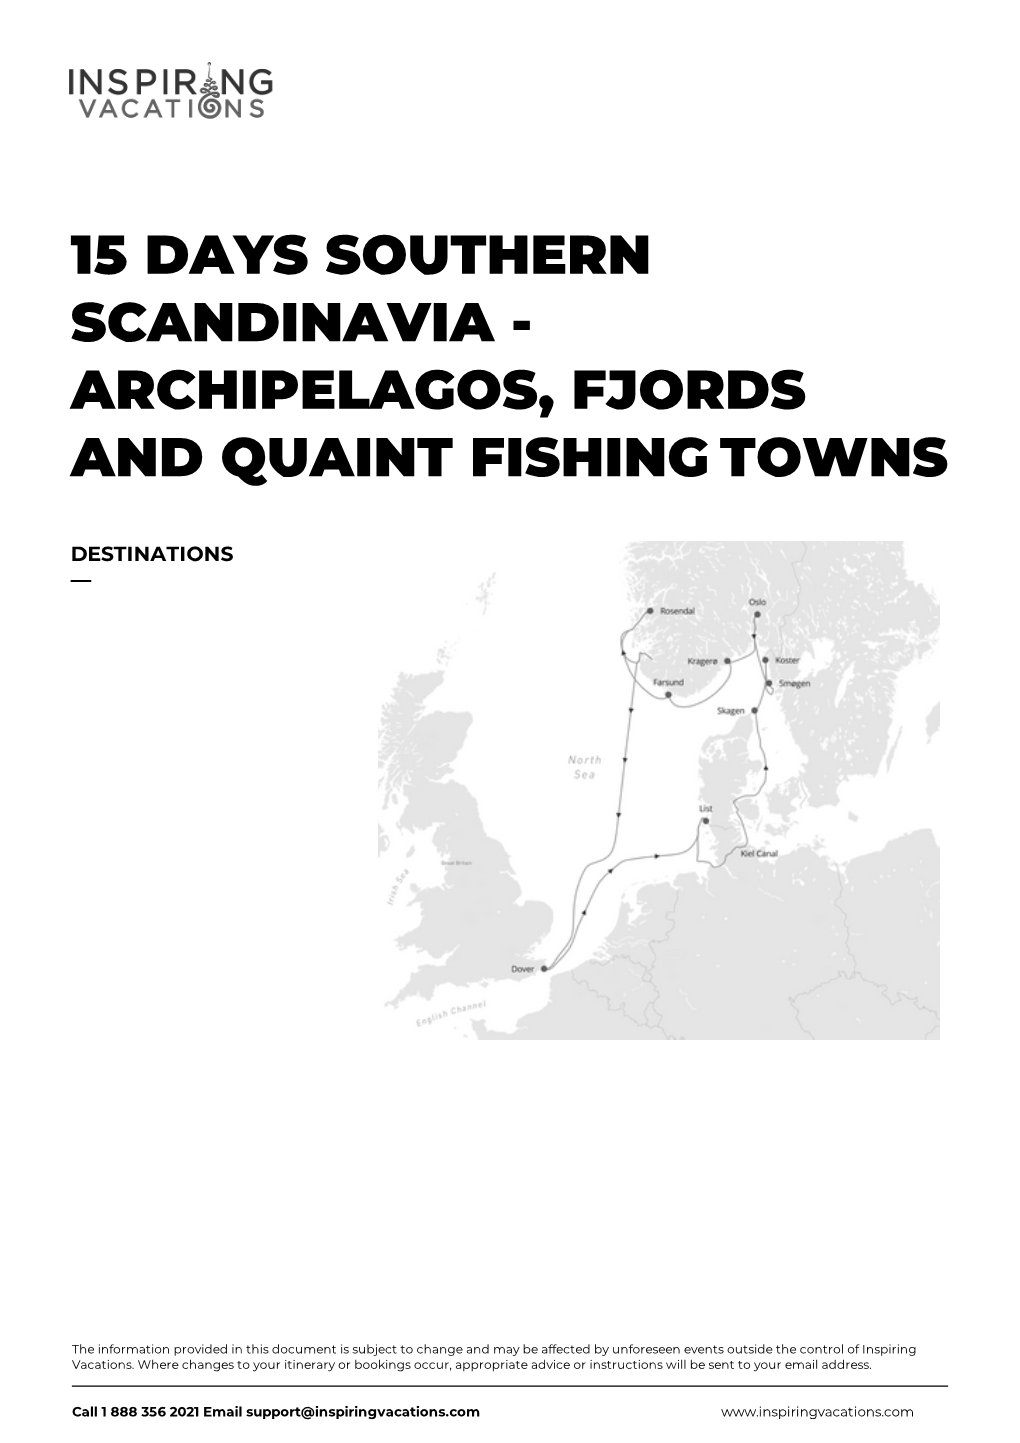 15 Days Southern Scandinavia - Archipelagos, Fjords and Quaint Fishing Towns